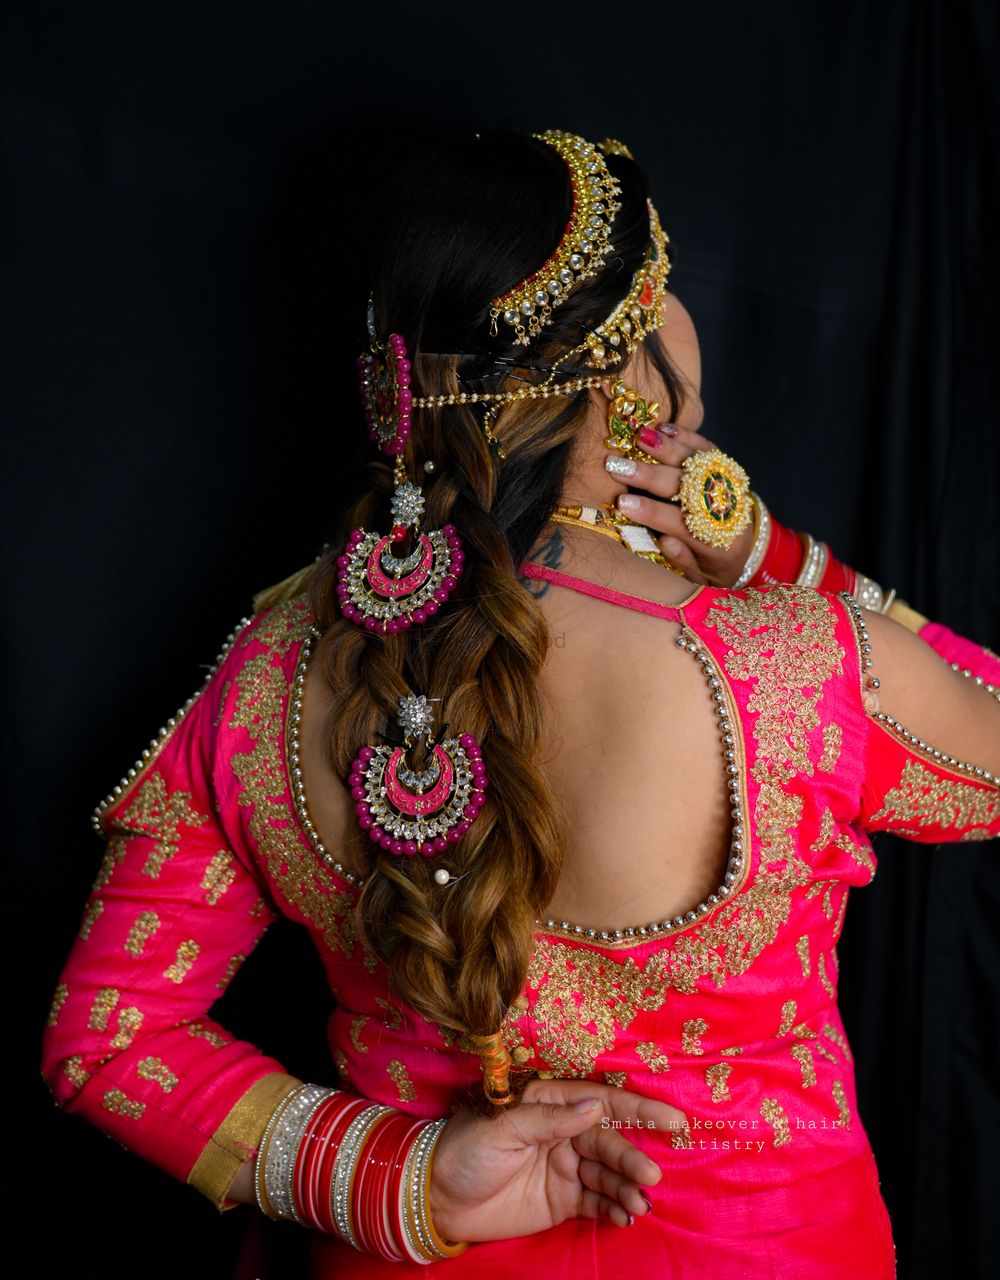 Photo From Hairstyles  - By Smita Makeup Artistry